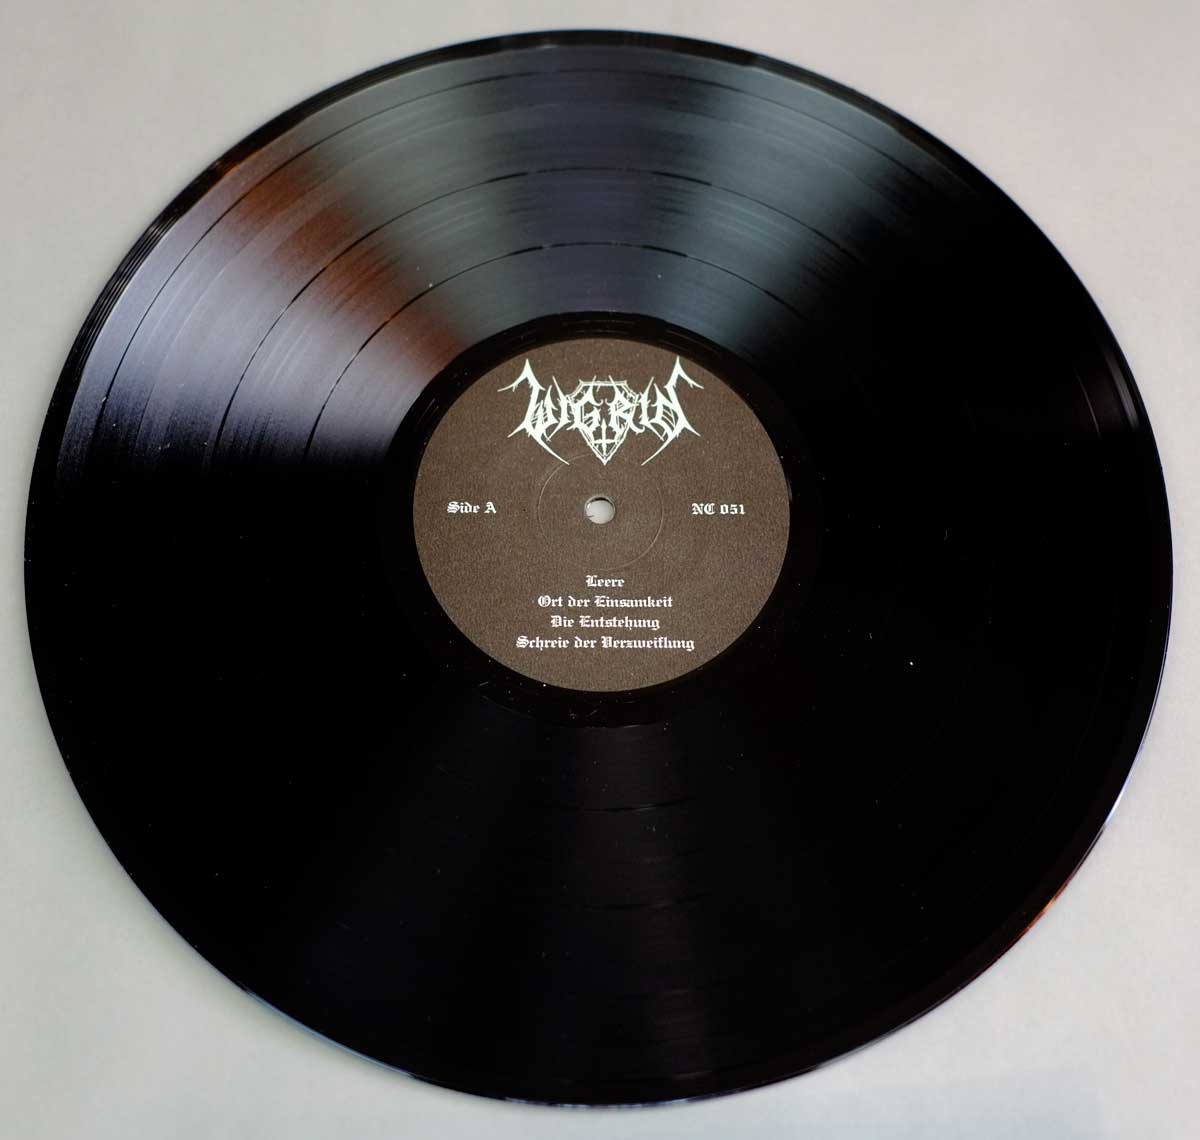 Photo of "WIGRID - Hoffnungstod" 12" LP Record - Side One: